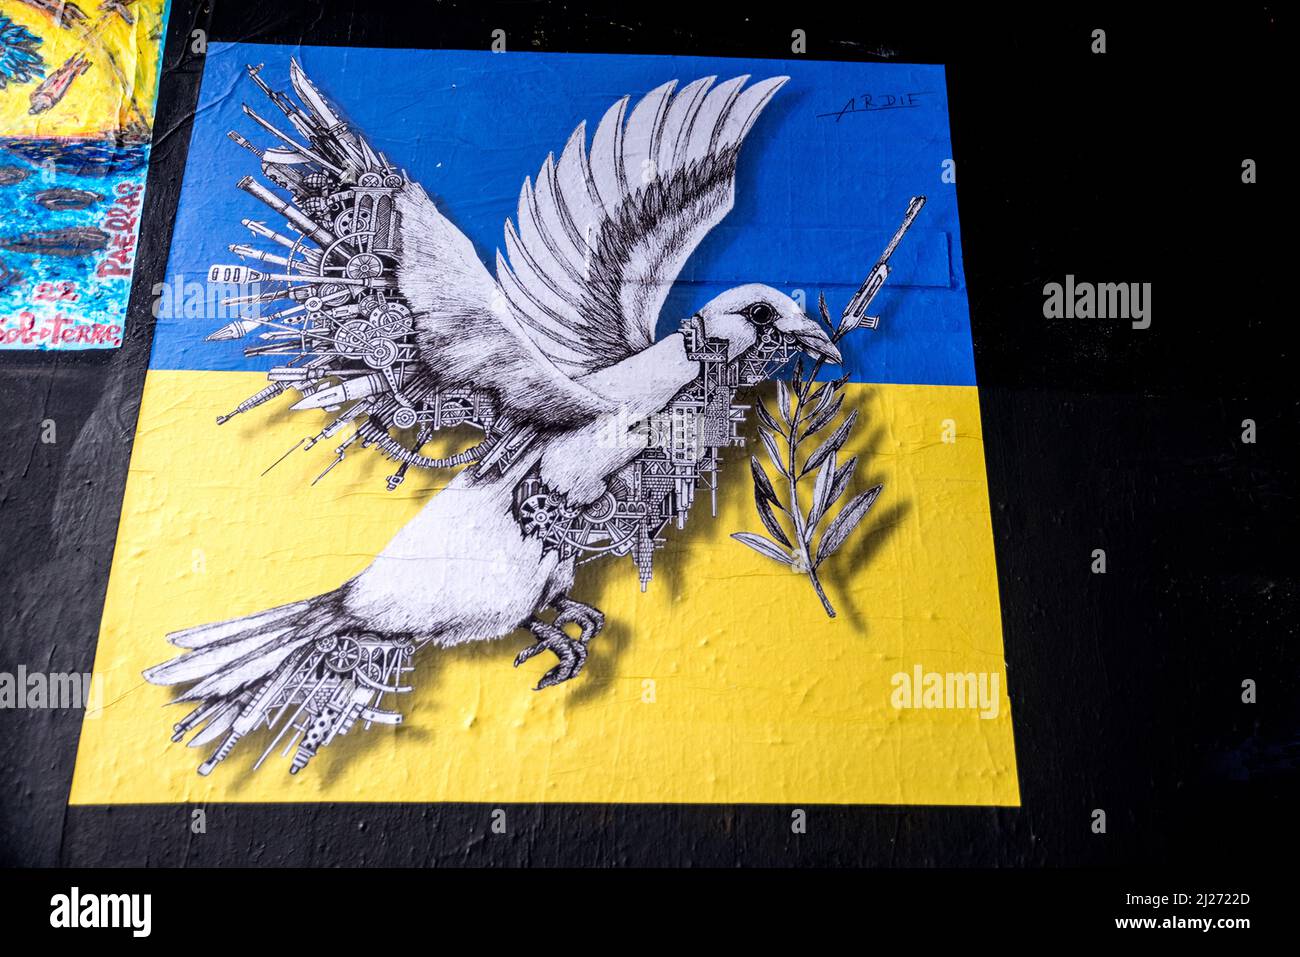 By Street artist Ardif - Street artists call for peace in Ukraine. This weekend, Spot13 and the Lavomatik (20 Bd du Général Jean Simon, 75013 Paris) invited stencil artists and gluers to come and post messages of peace and love on the walls. Paris, France, on March 30, 2022. Photo by Denis Prezat/ABACAPRESS.COM Stock Photo